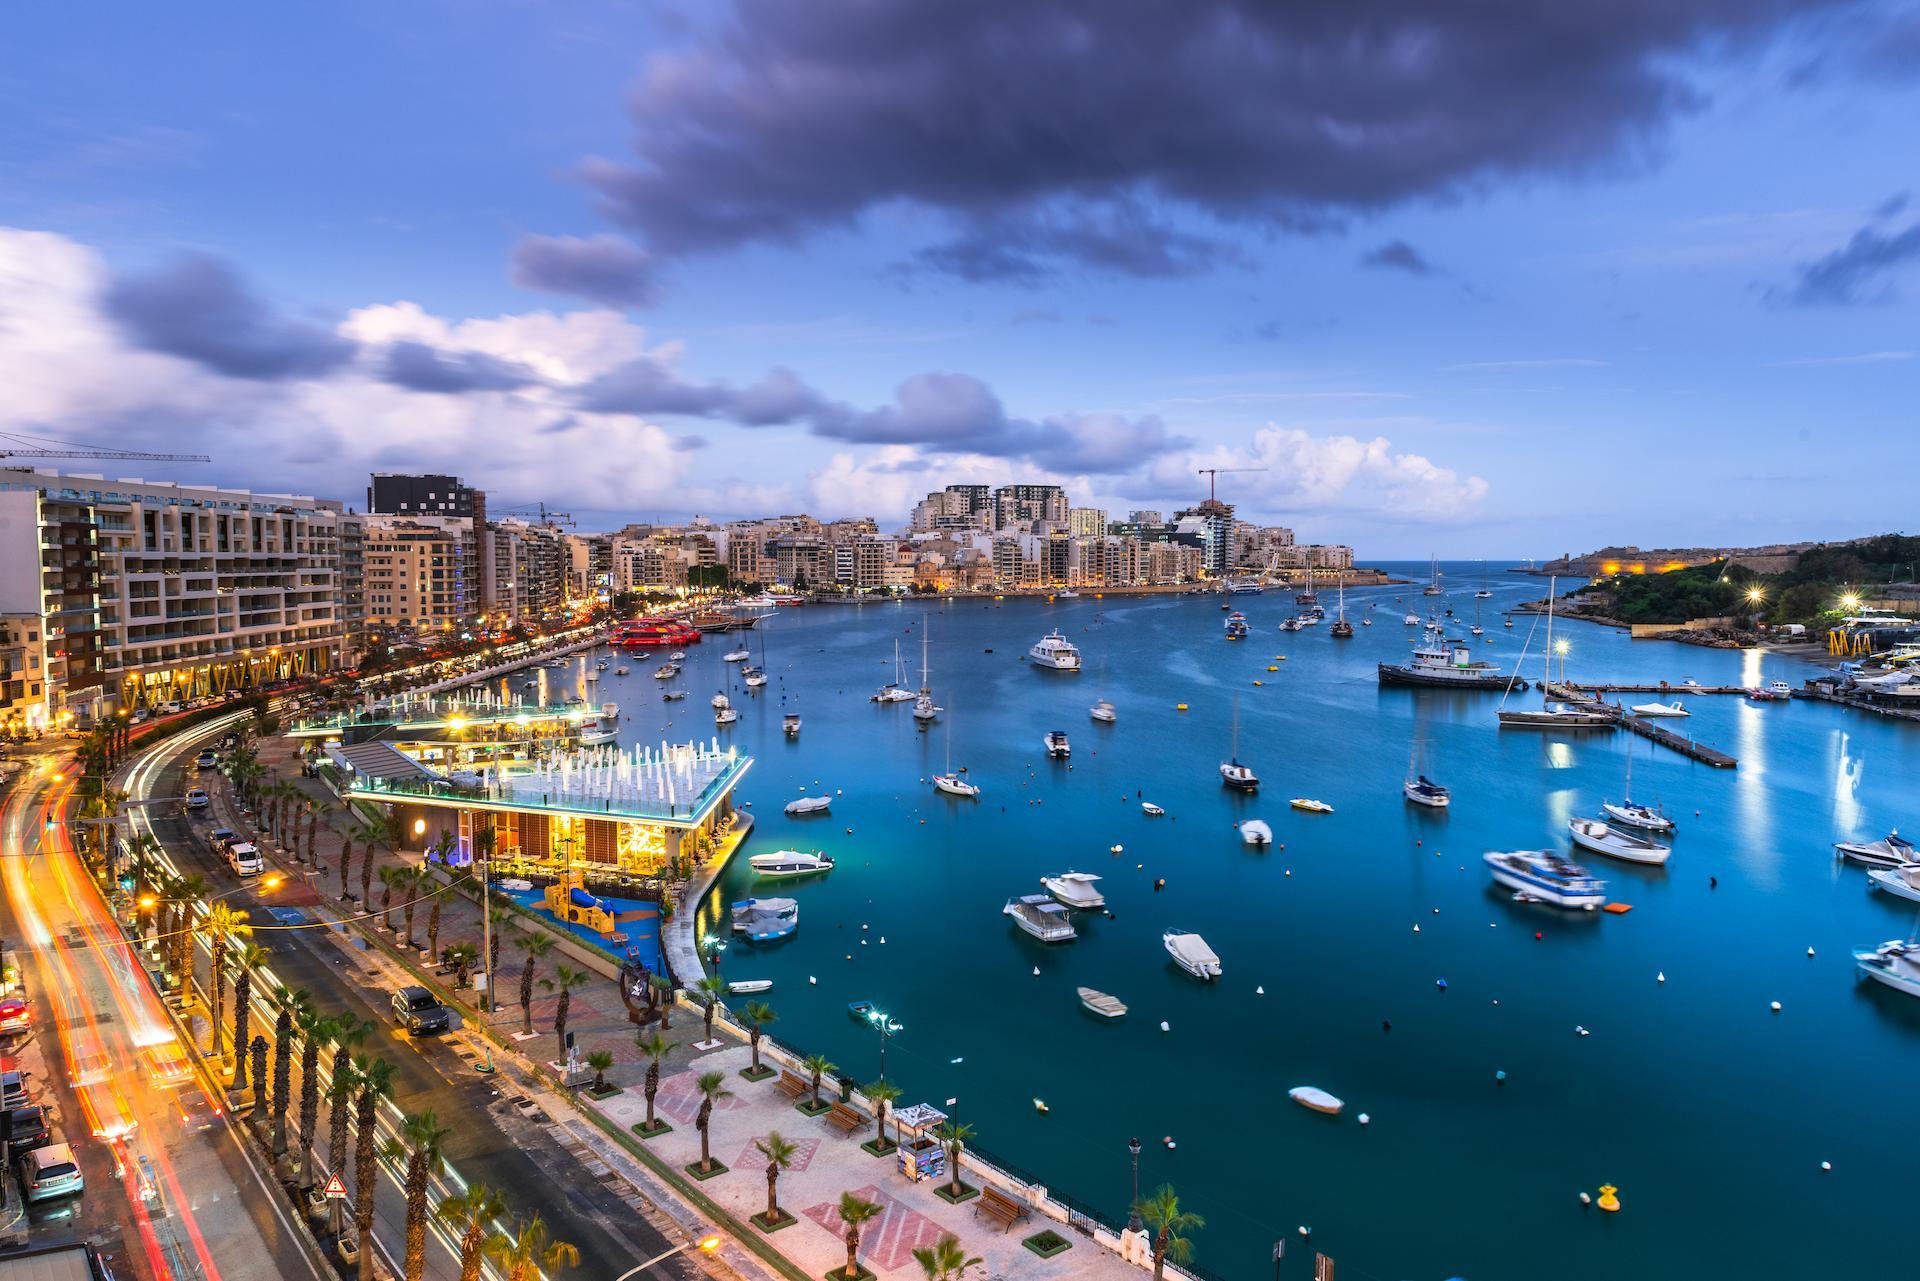 stock photo of Malta with water and boats